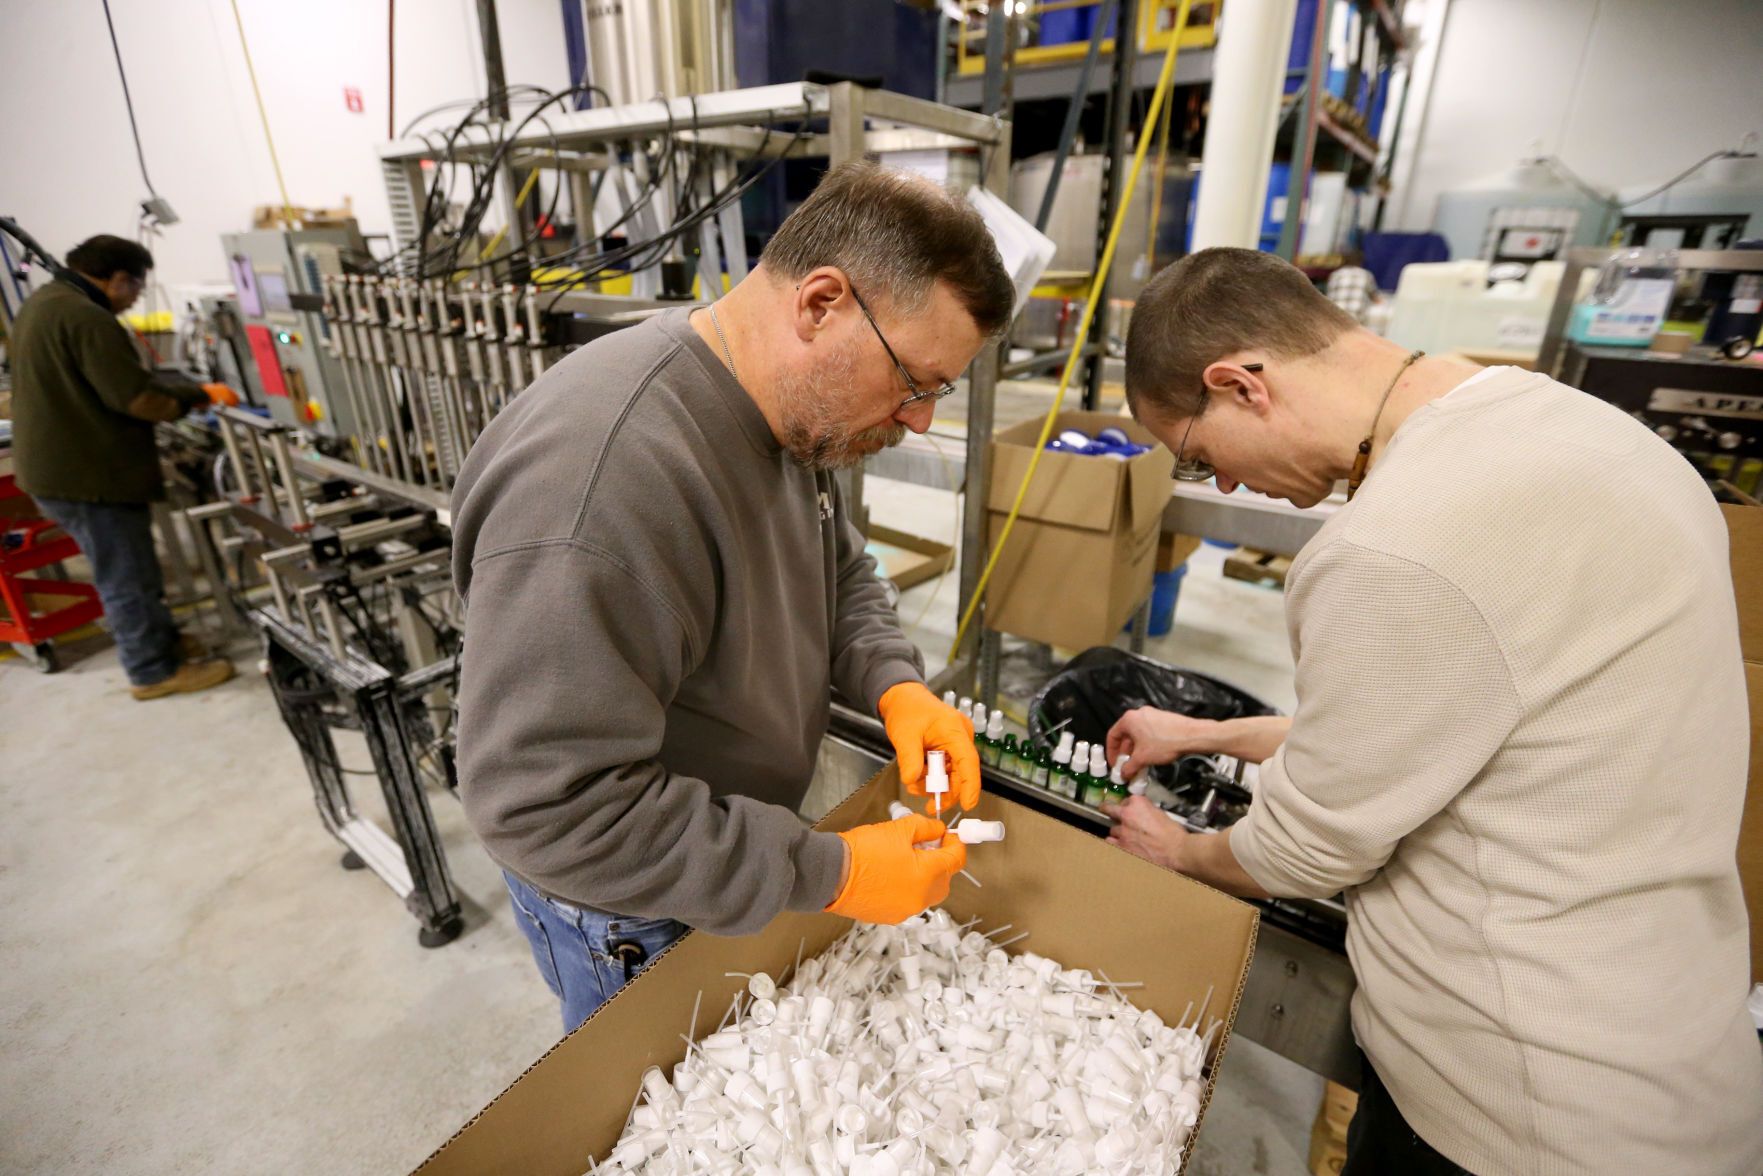 Gene Fangman (left) and Jeremy Crubaugh put caps on bottles at Higley Industries in Dyersville, Iowa, on Monday, Feb. 14, 2022.    PHOTO CREDIT: JESSICA REILLY